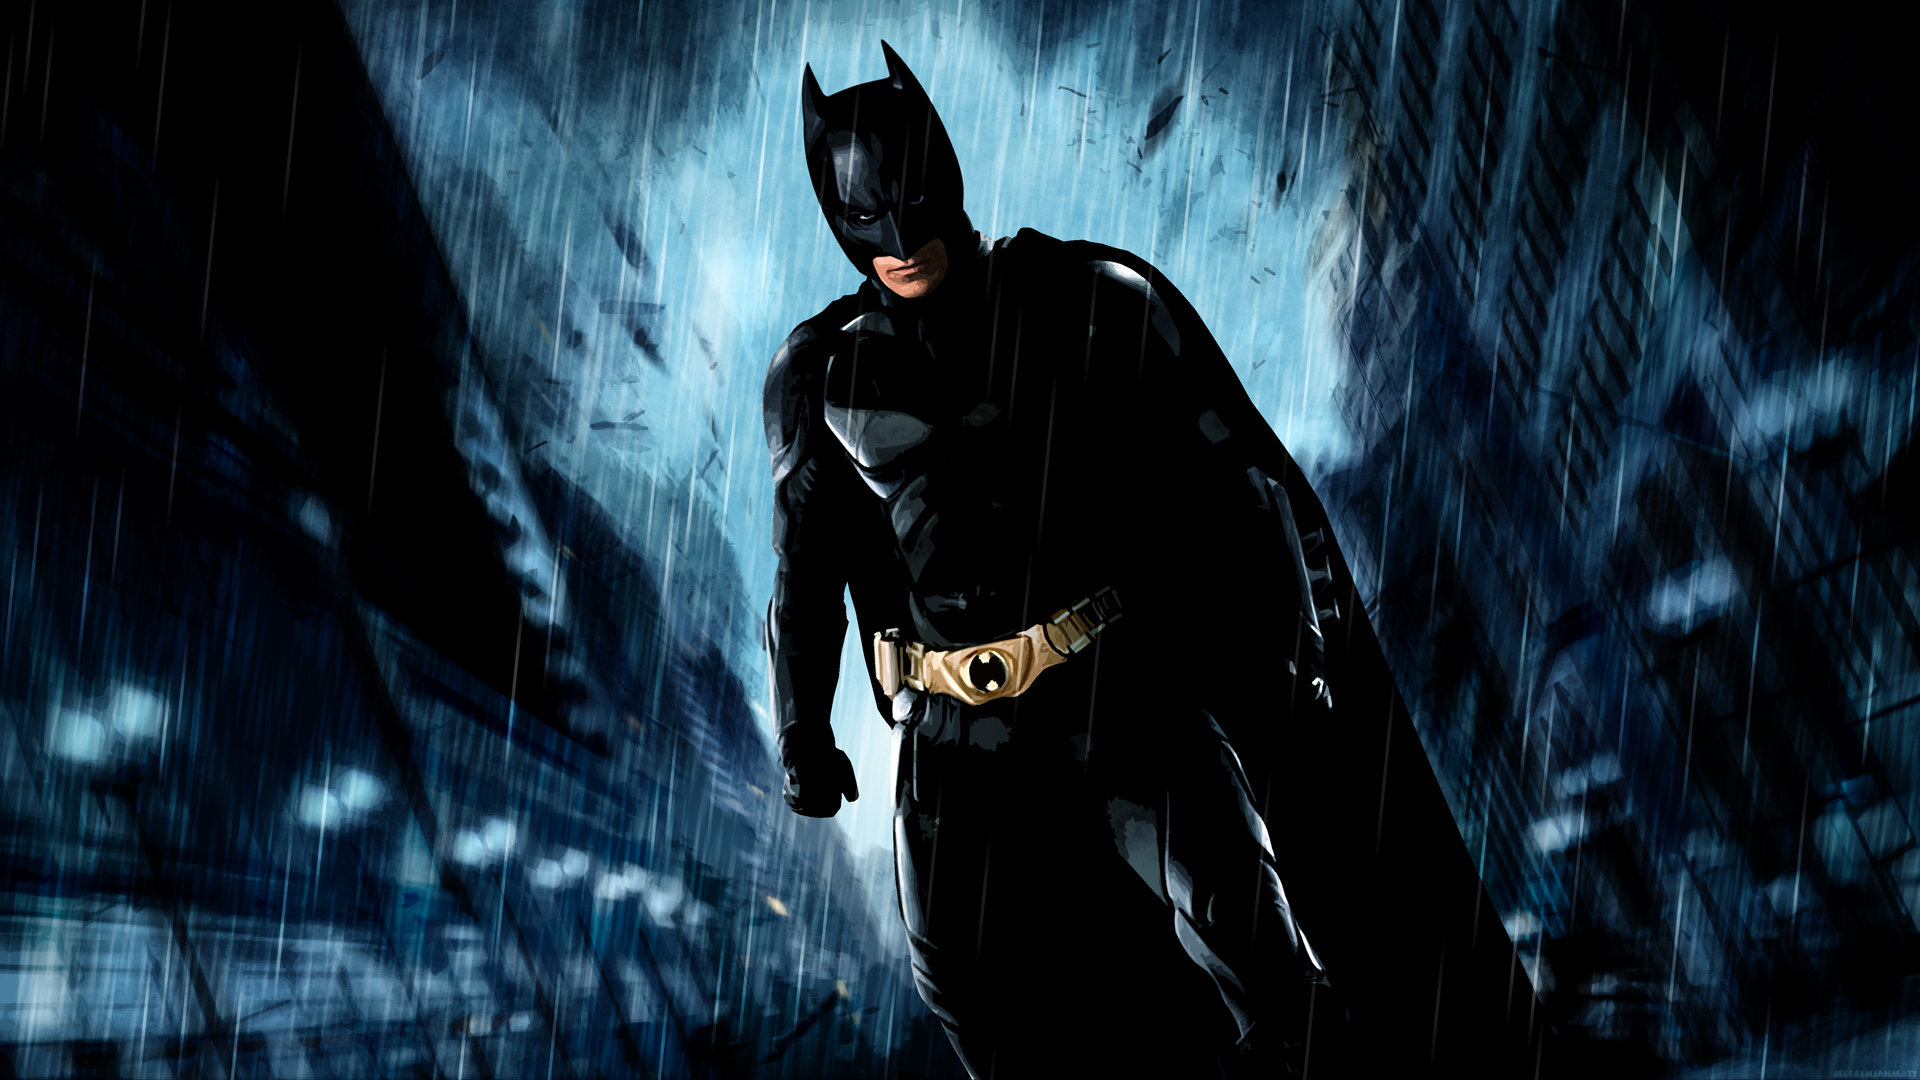 The Dark Knight Wallpapers 1920x1080 Full Hd 1080p Desktop Images, Photos, Reviews